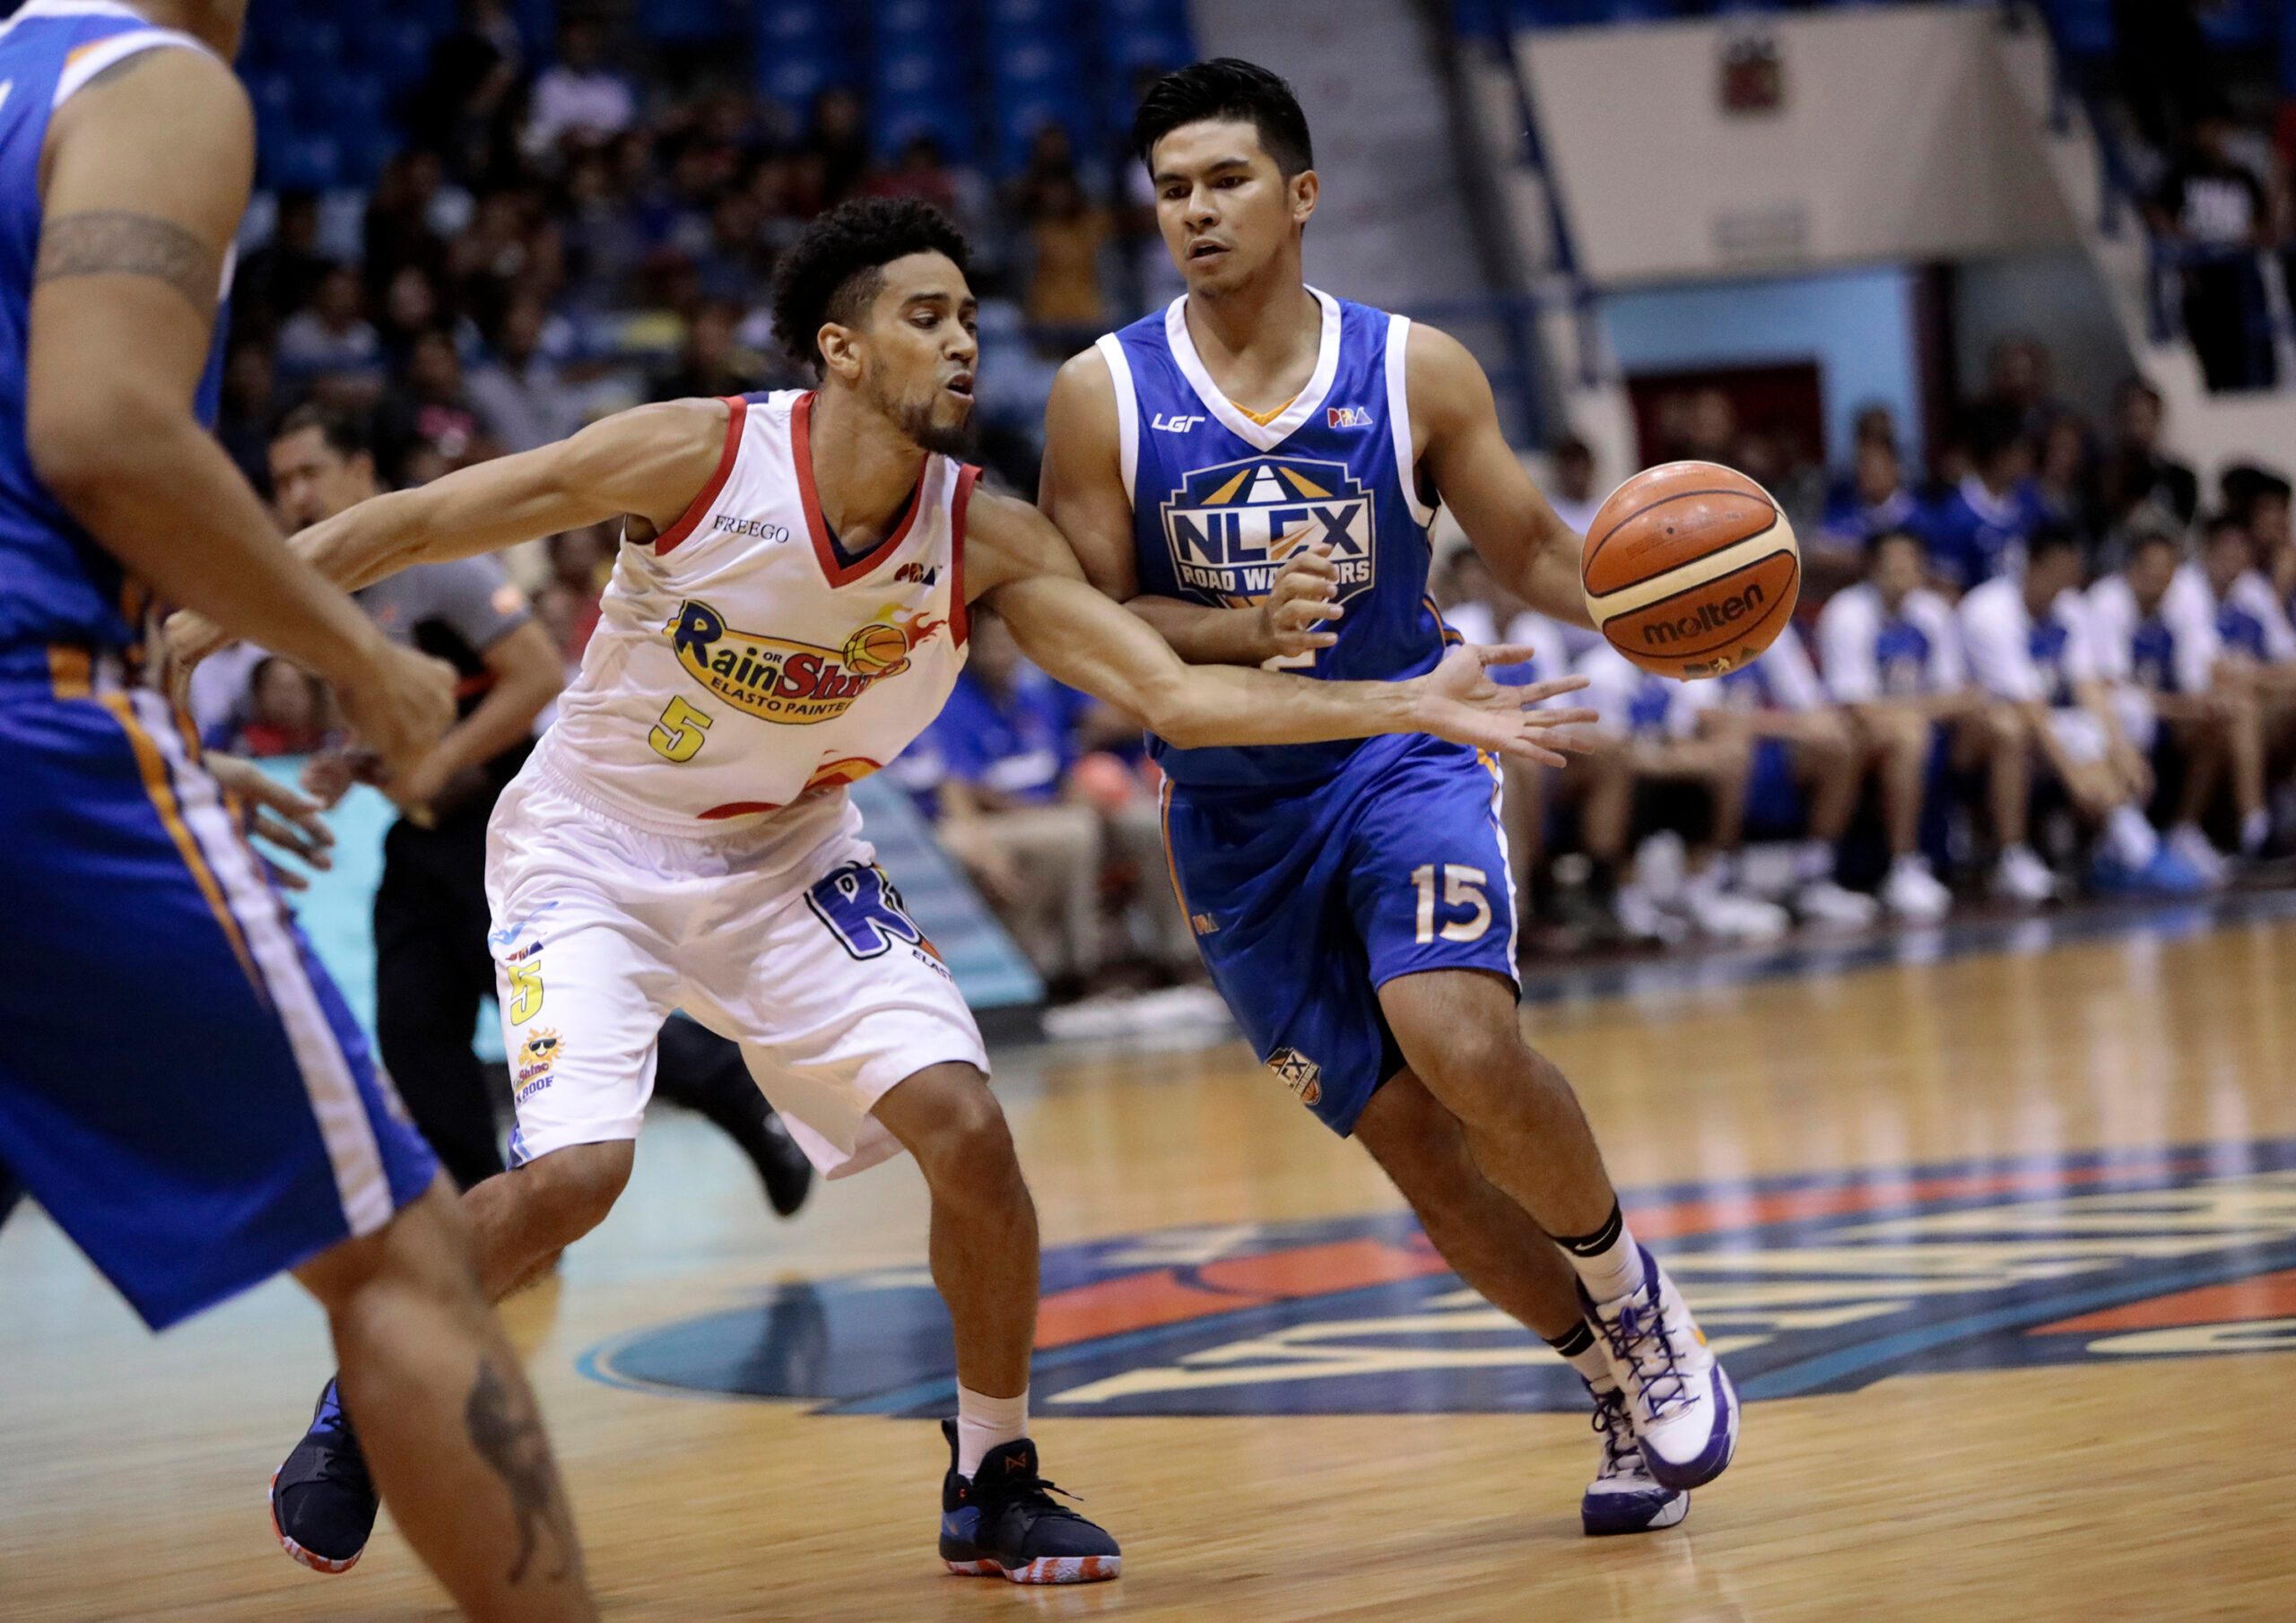 Kiefer Ravena’s absence a ‘temporary setback’ for NLEX, says Guiao